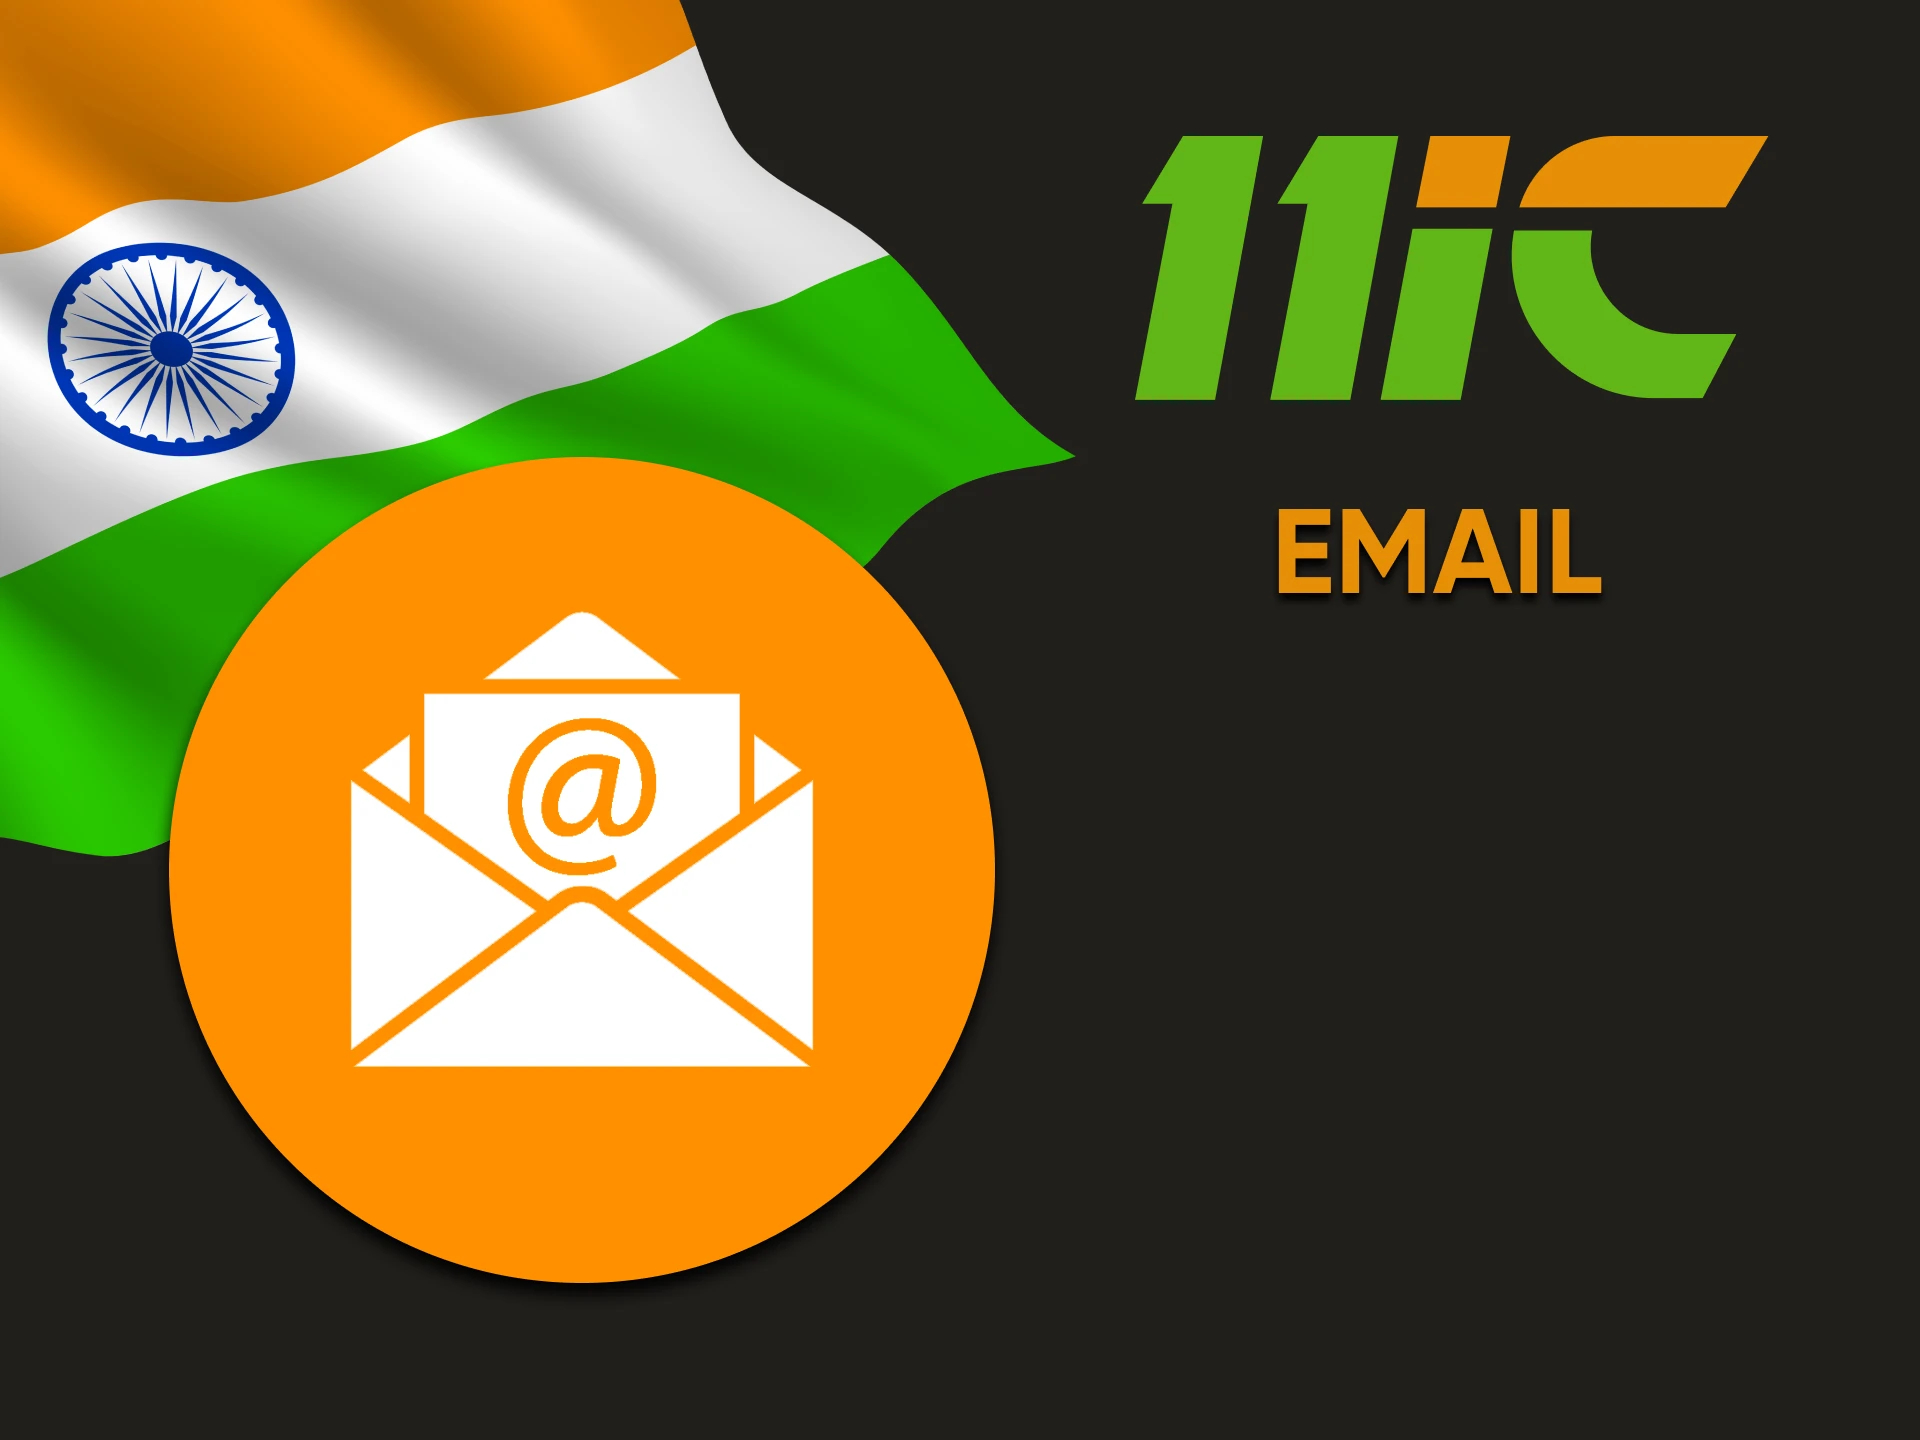 You can contact the 11ic support team via email.